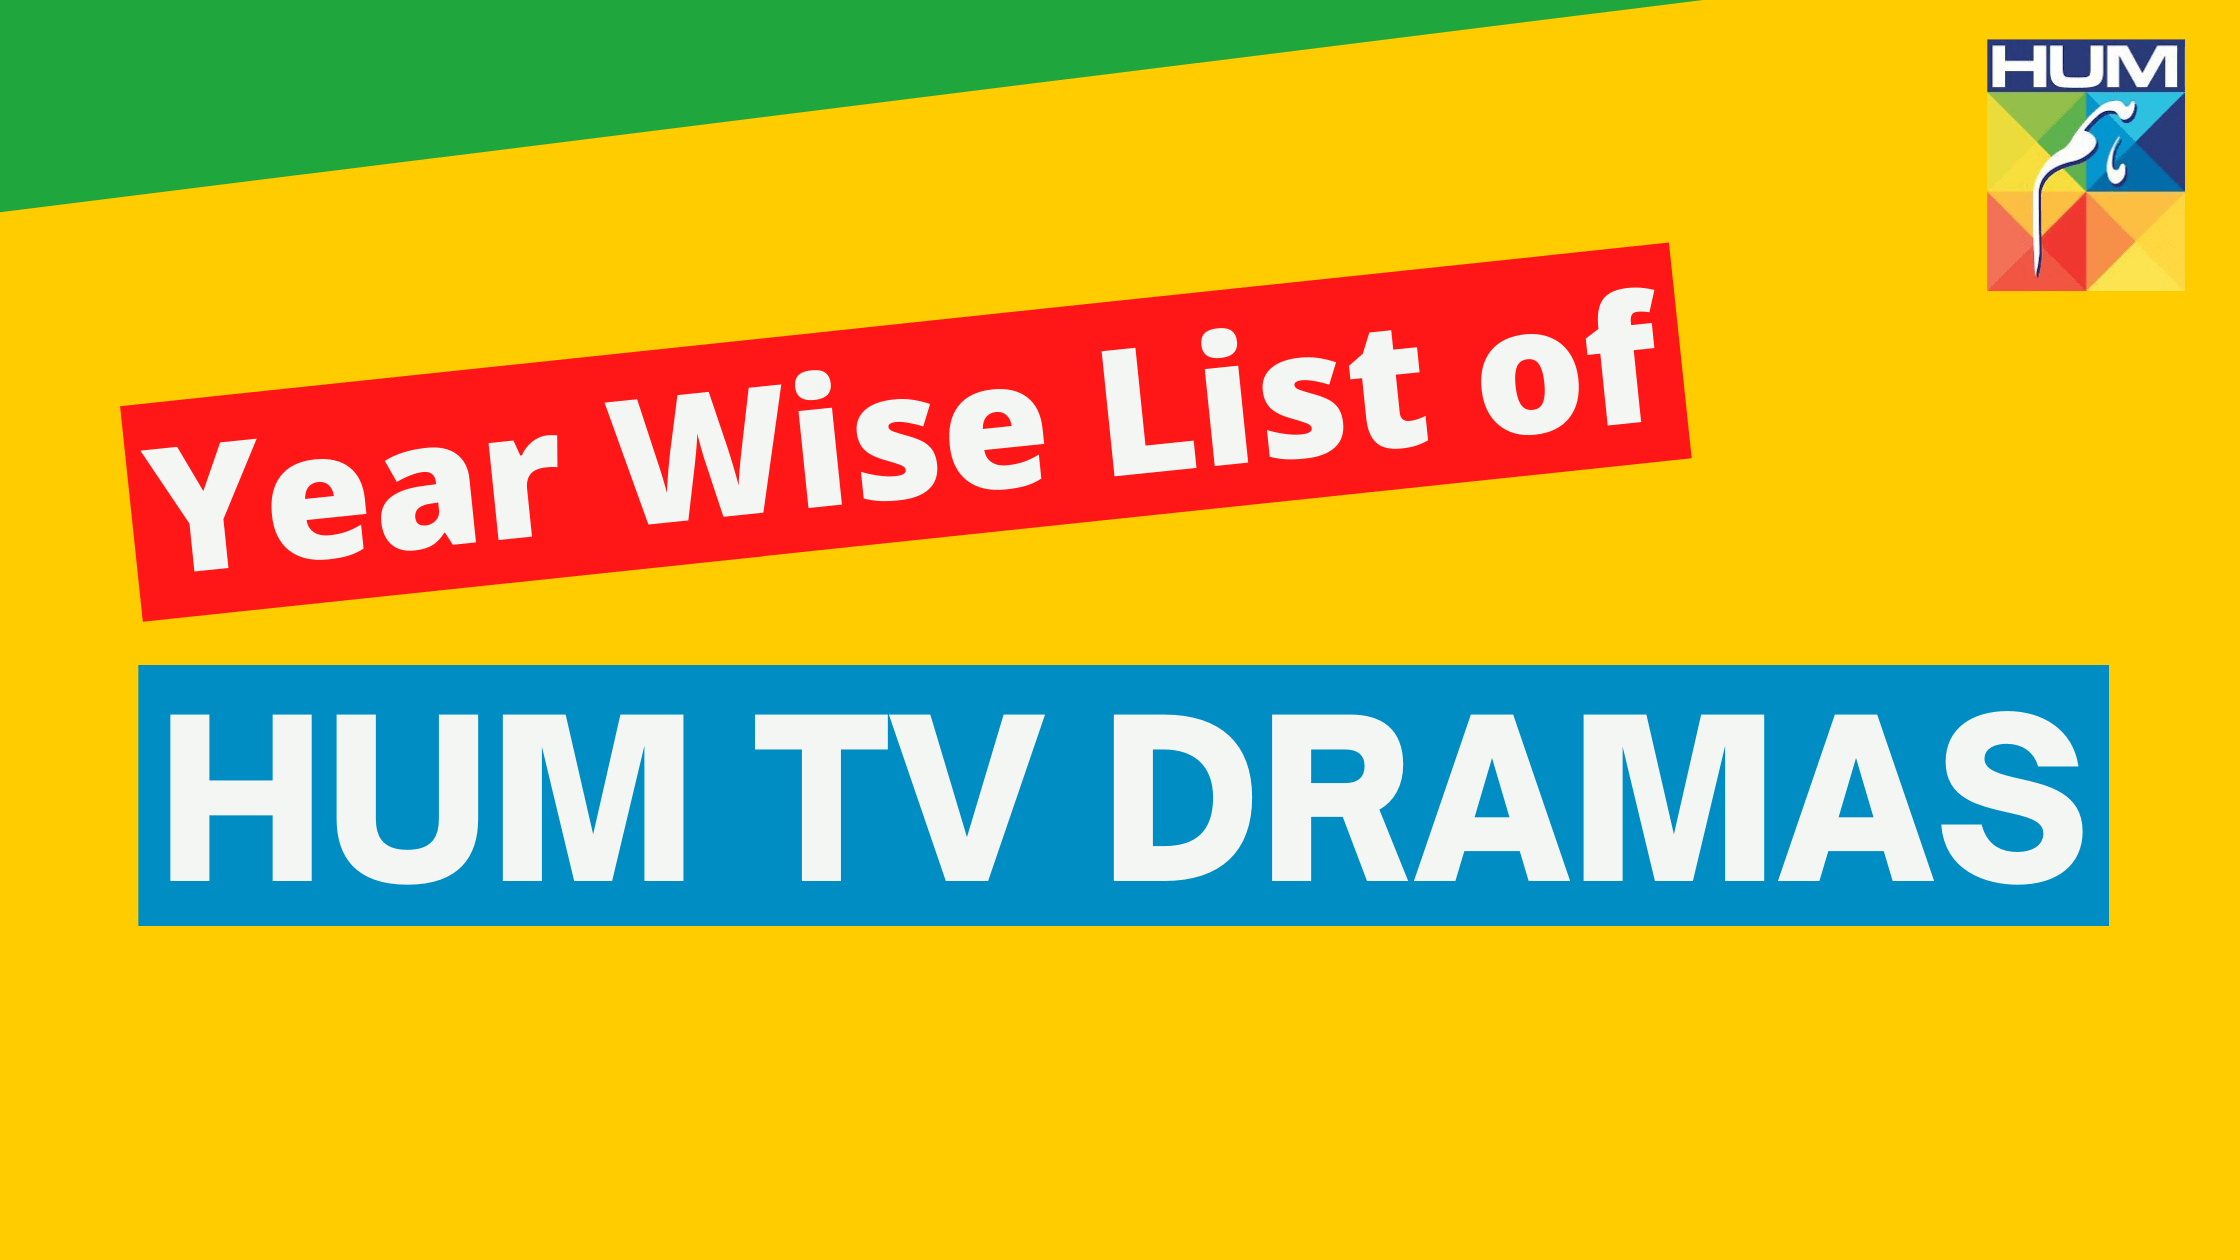 All Dramas Released by HUM TV (Year Wise List)